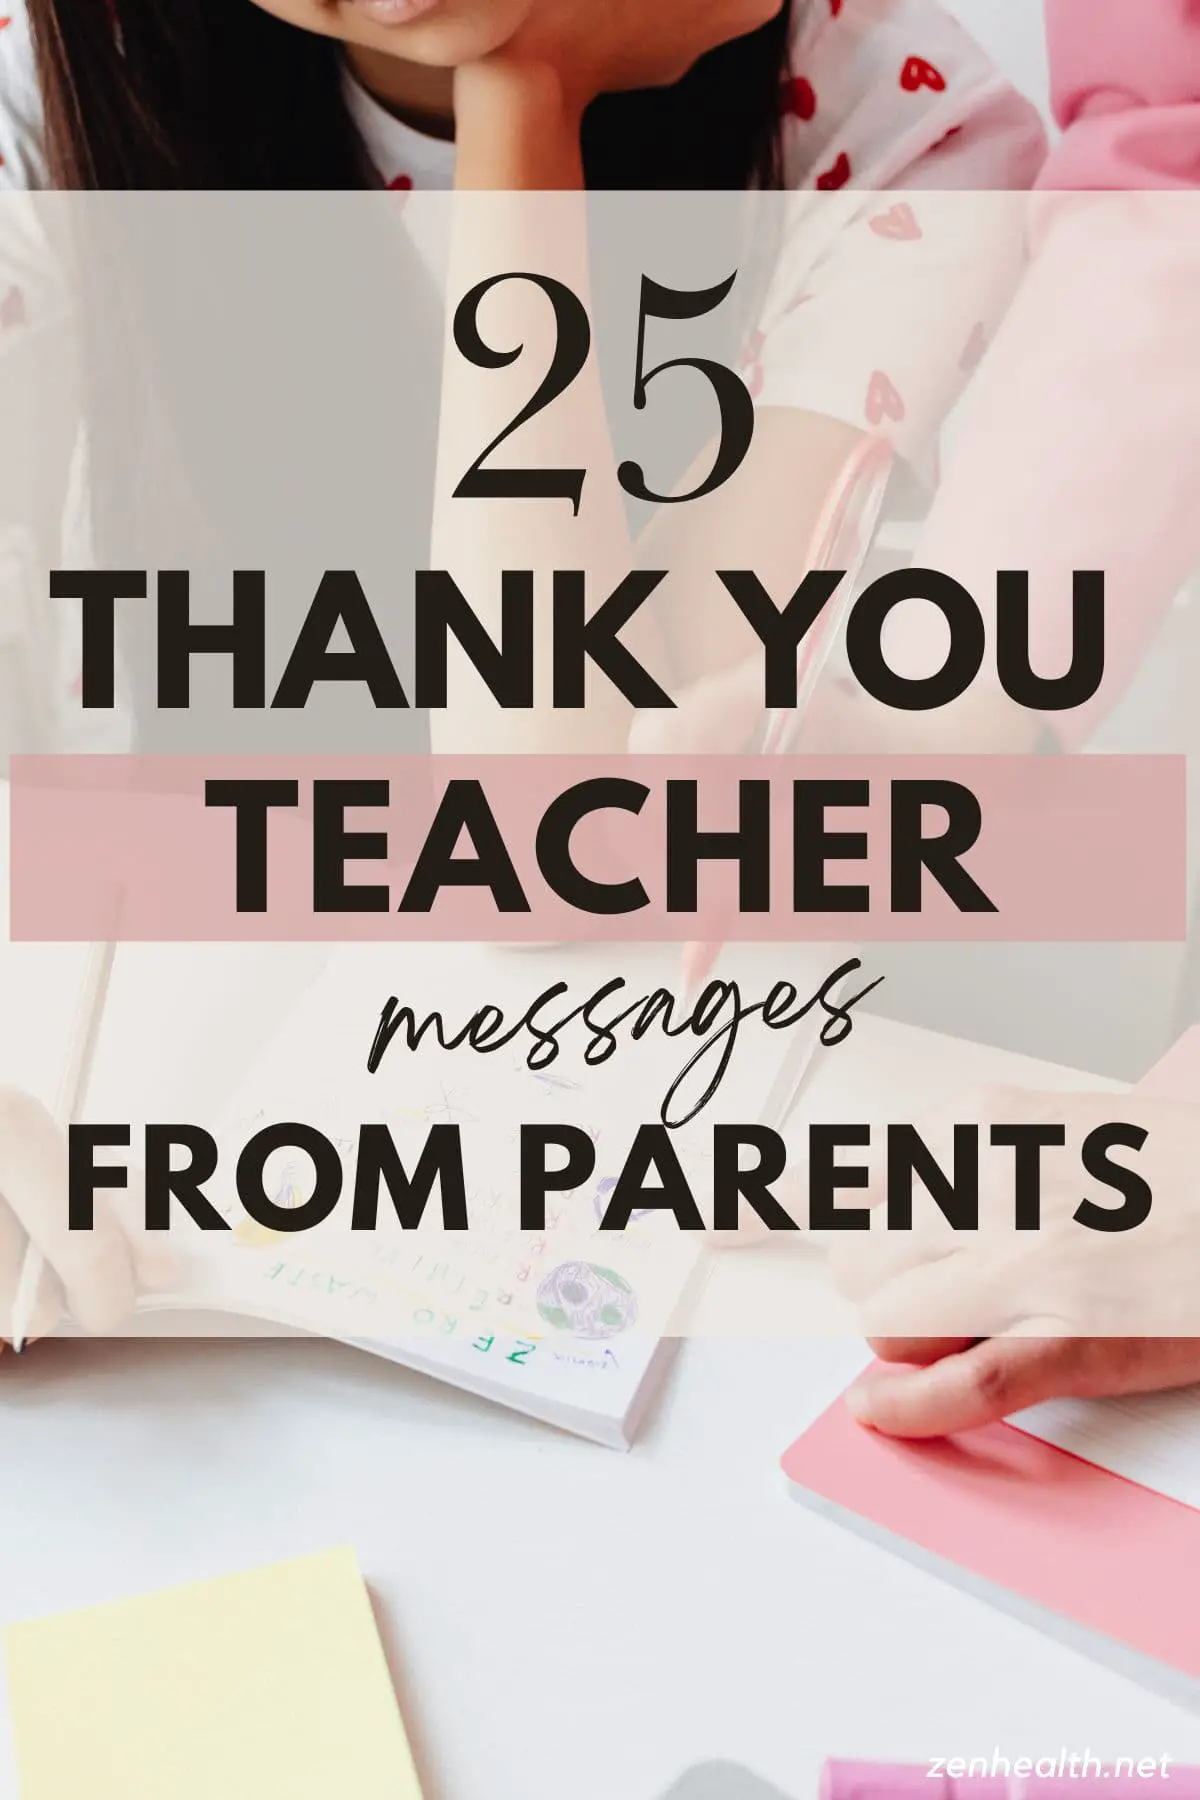 25 thank you teacher messages from parents text overlay on a photo of a student with their book open and a teacher helping